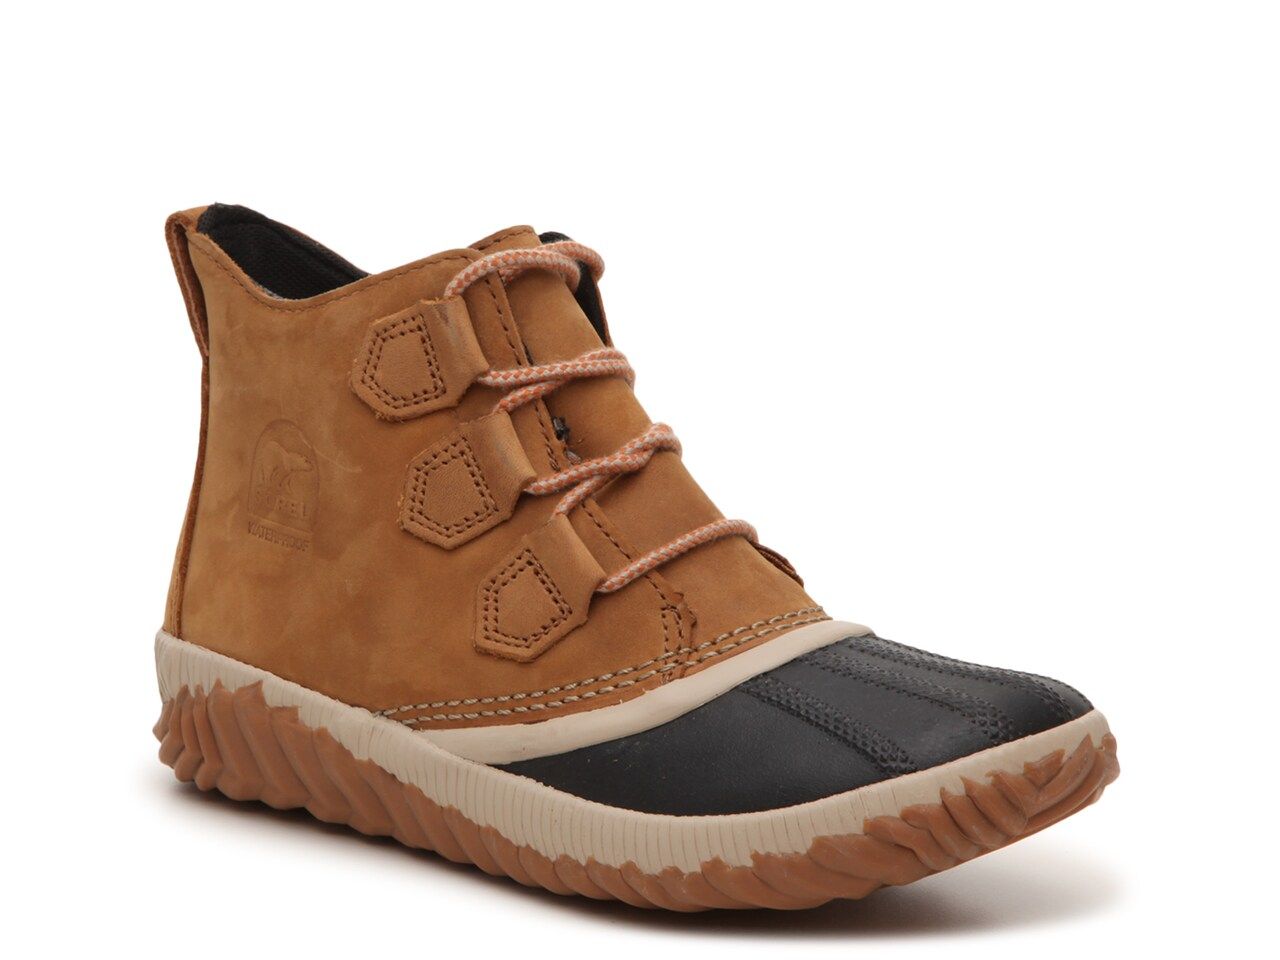 Sorel Out N About Plus Duck Boot | DSW